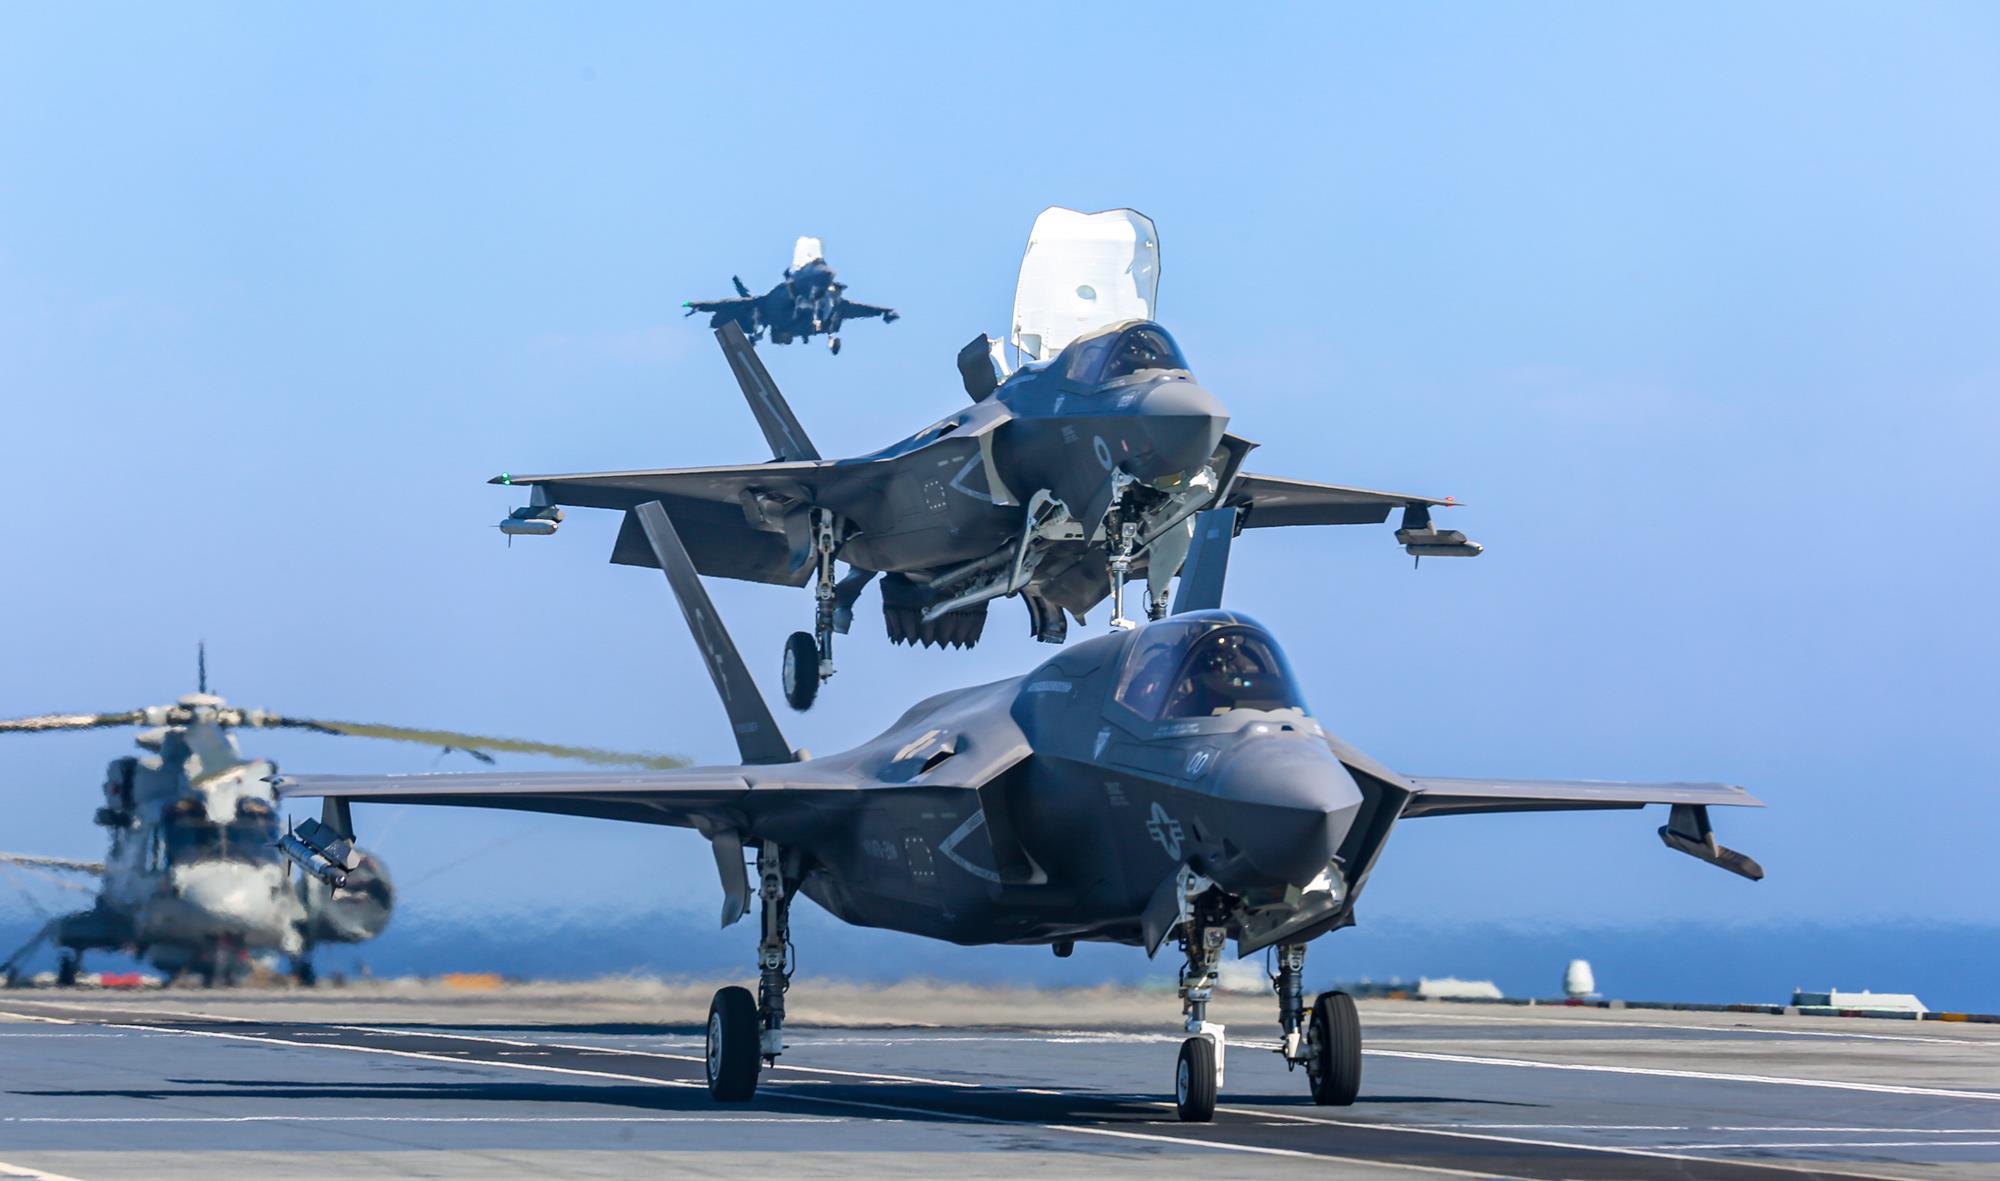 The US Navy has received the latest JPALS precision approach and landing system, compatible with the F-35B and F-35C fifth-generation fighters